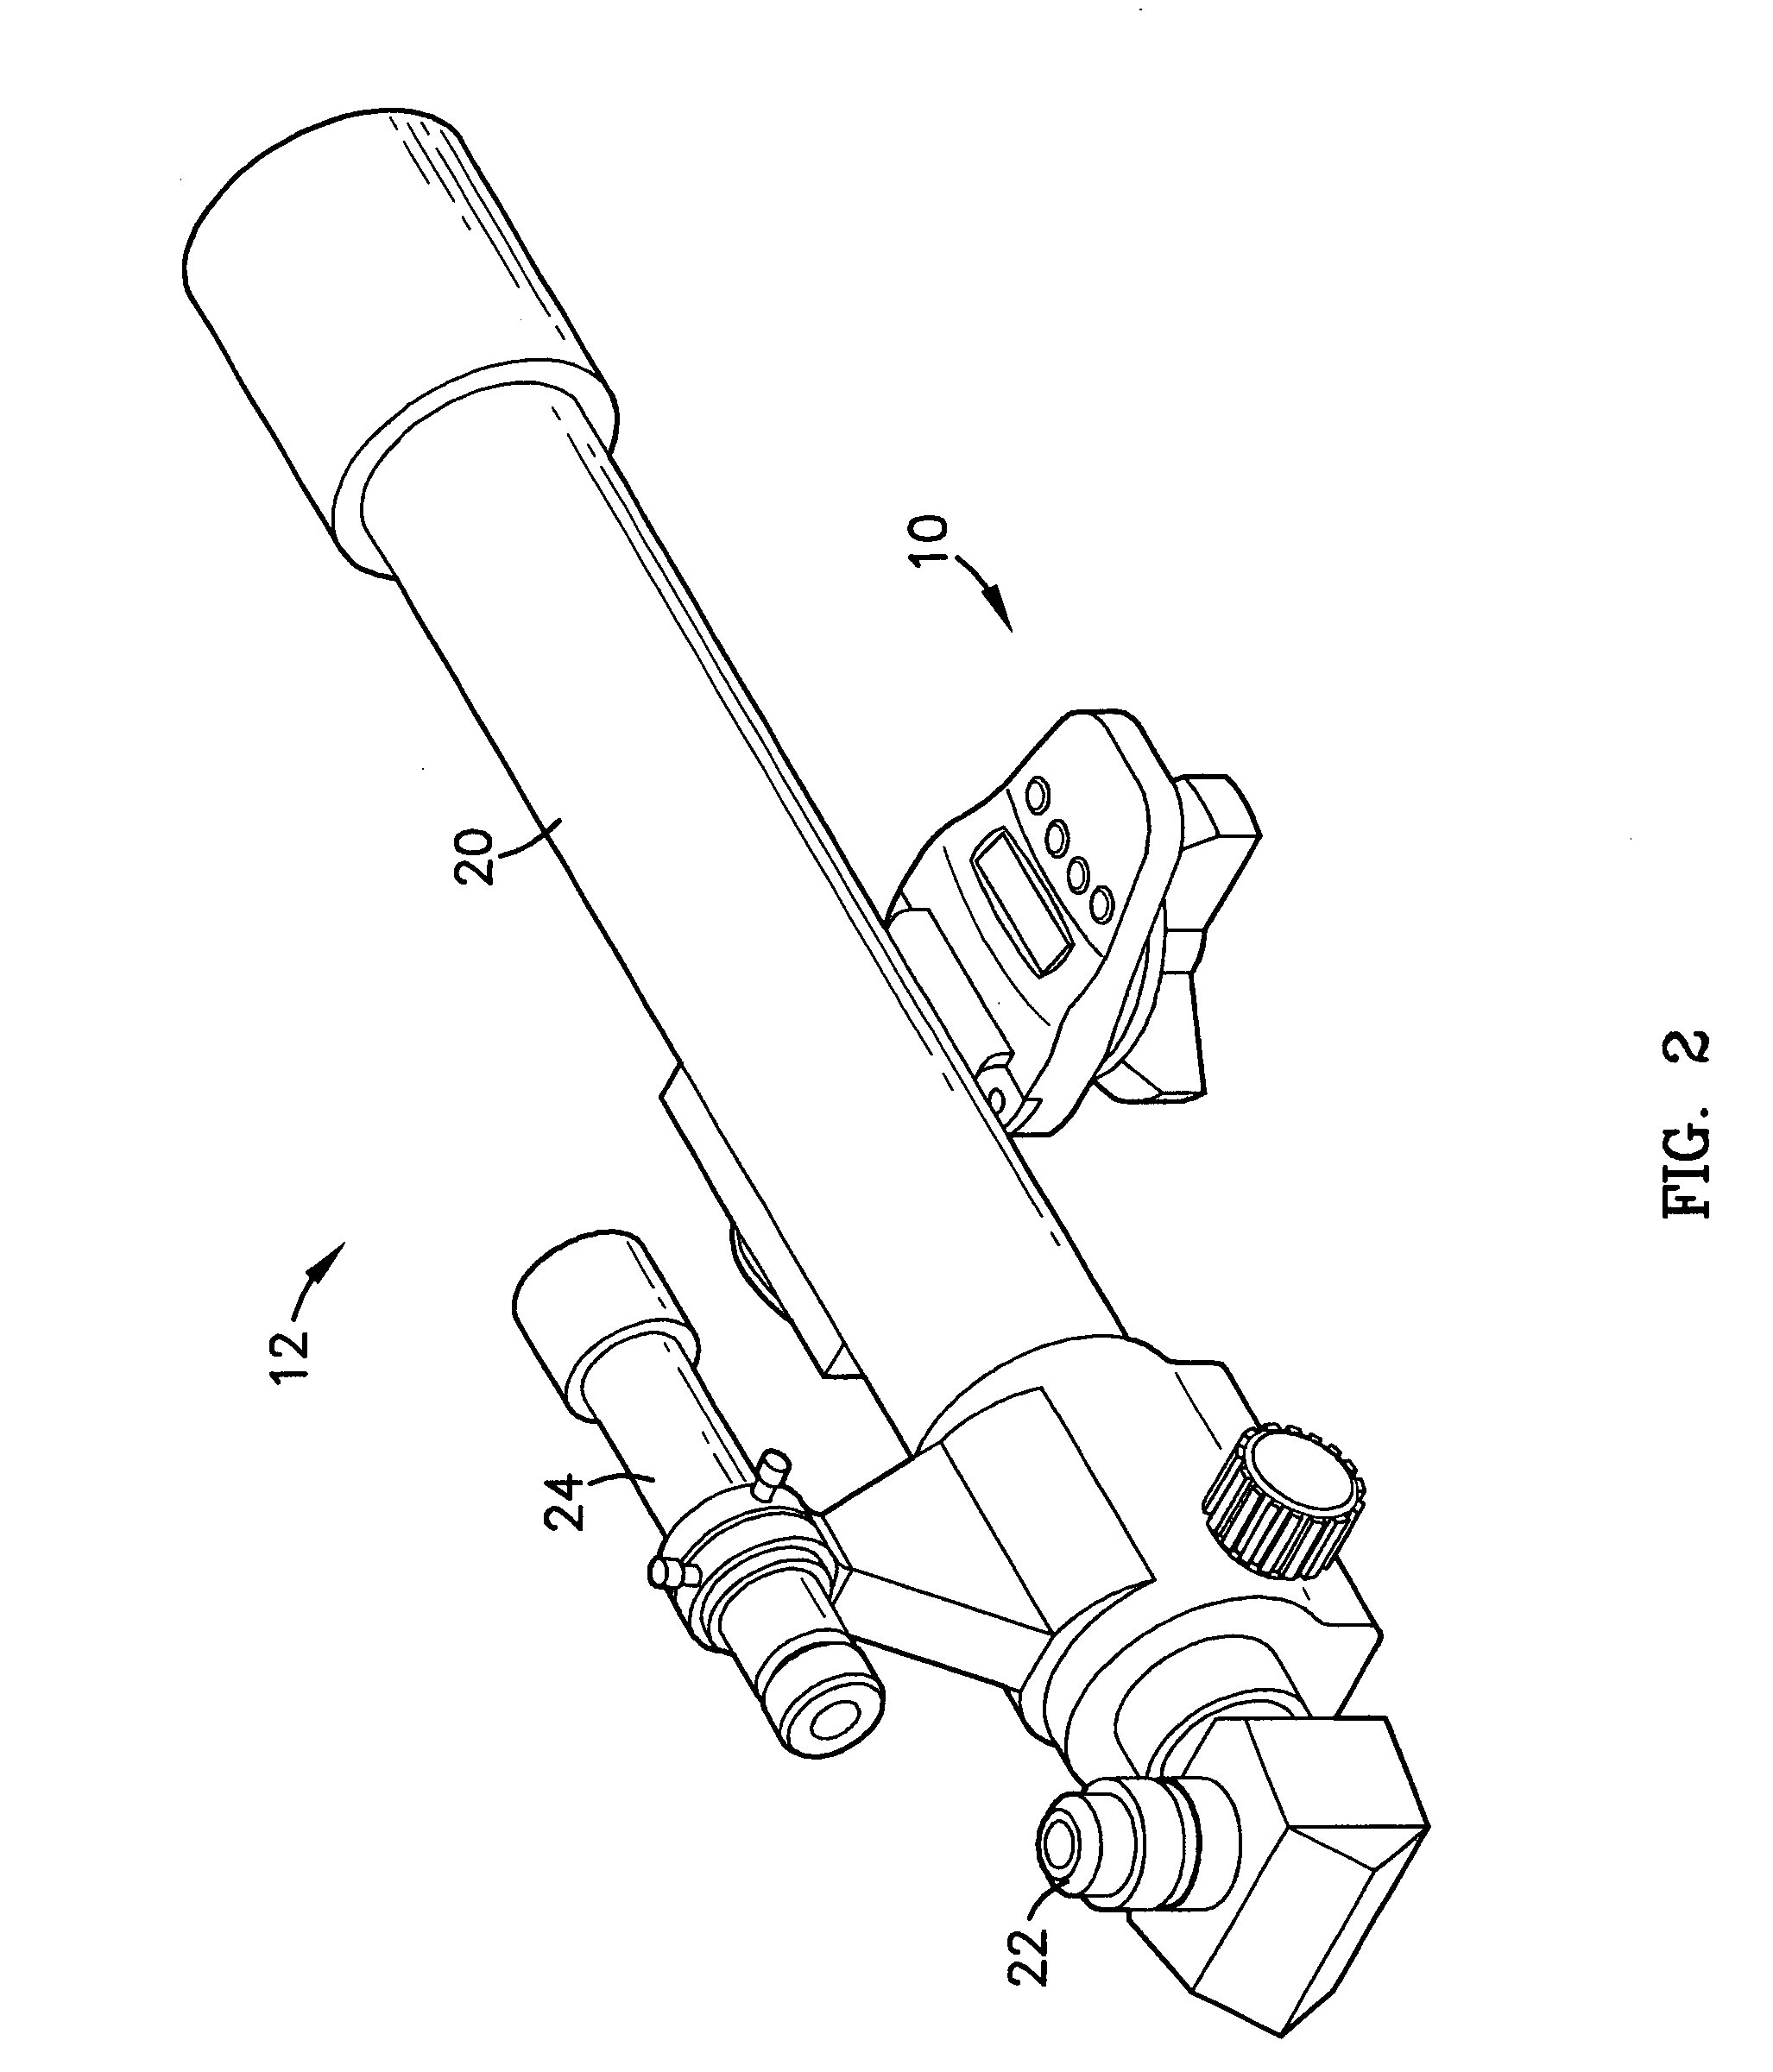 Telescope mount having locator system and drive mechanism for locating objects and positioning telescope